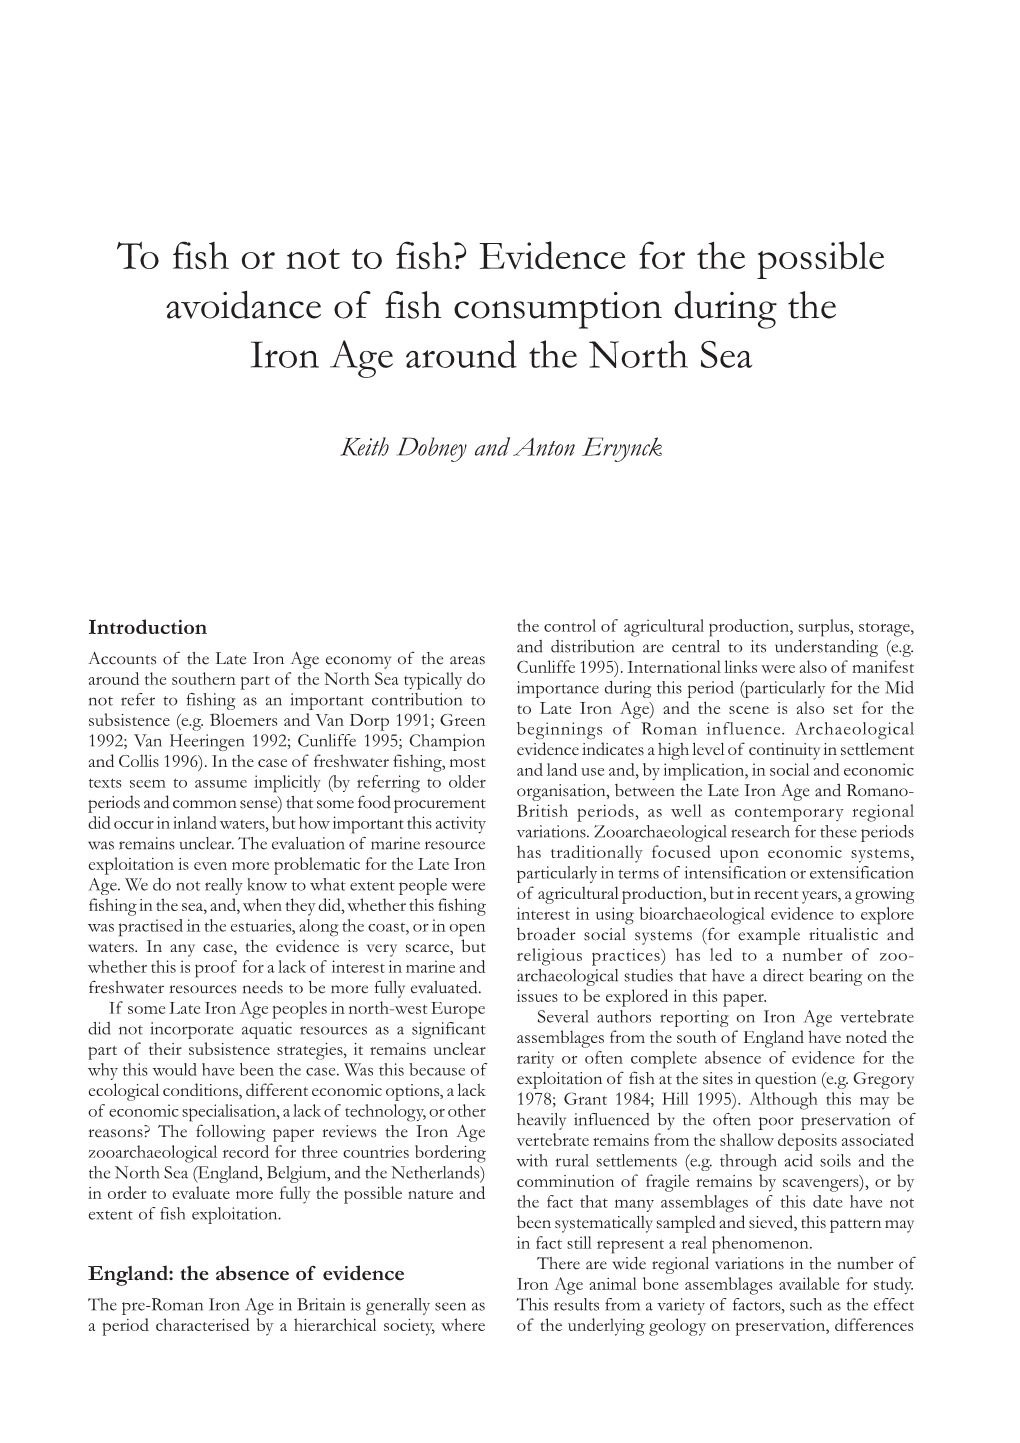 Evidence for the Possible Avoidance of Fish Consumption During the Iron Age Around the North Sea